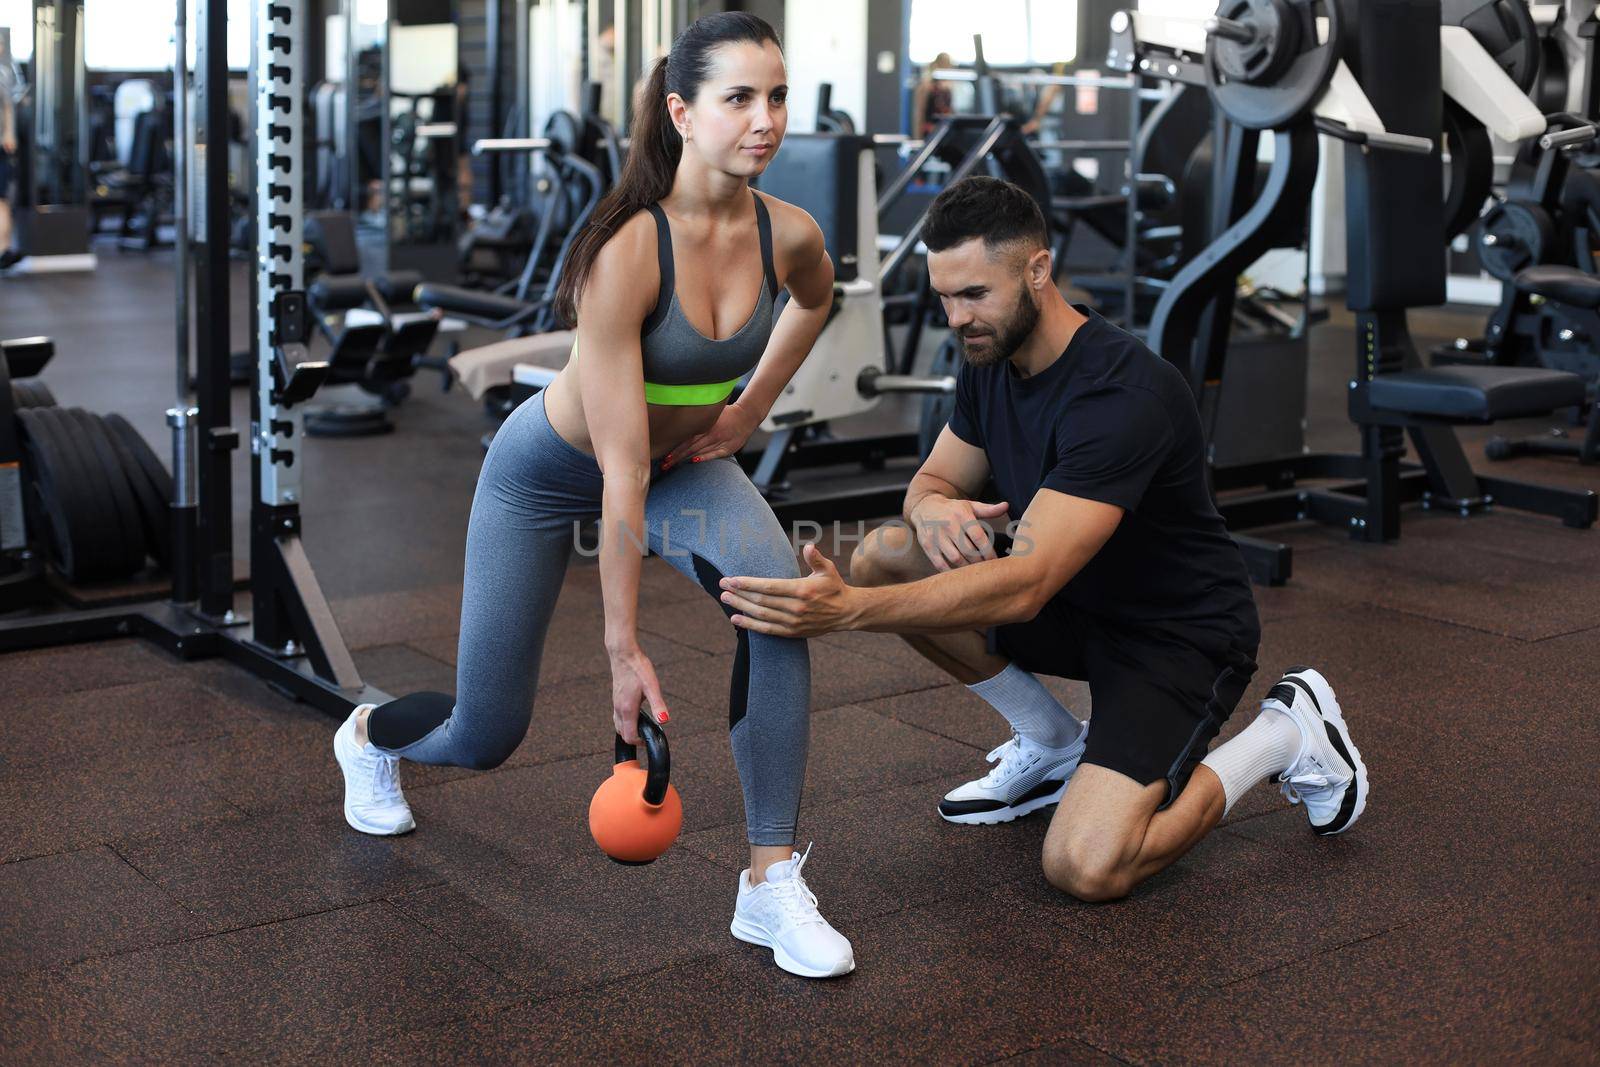 Fitness instructor exercising with his client at the gym